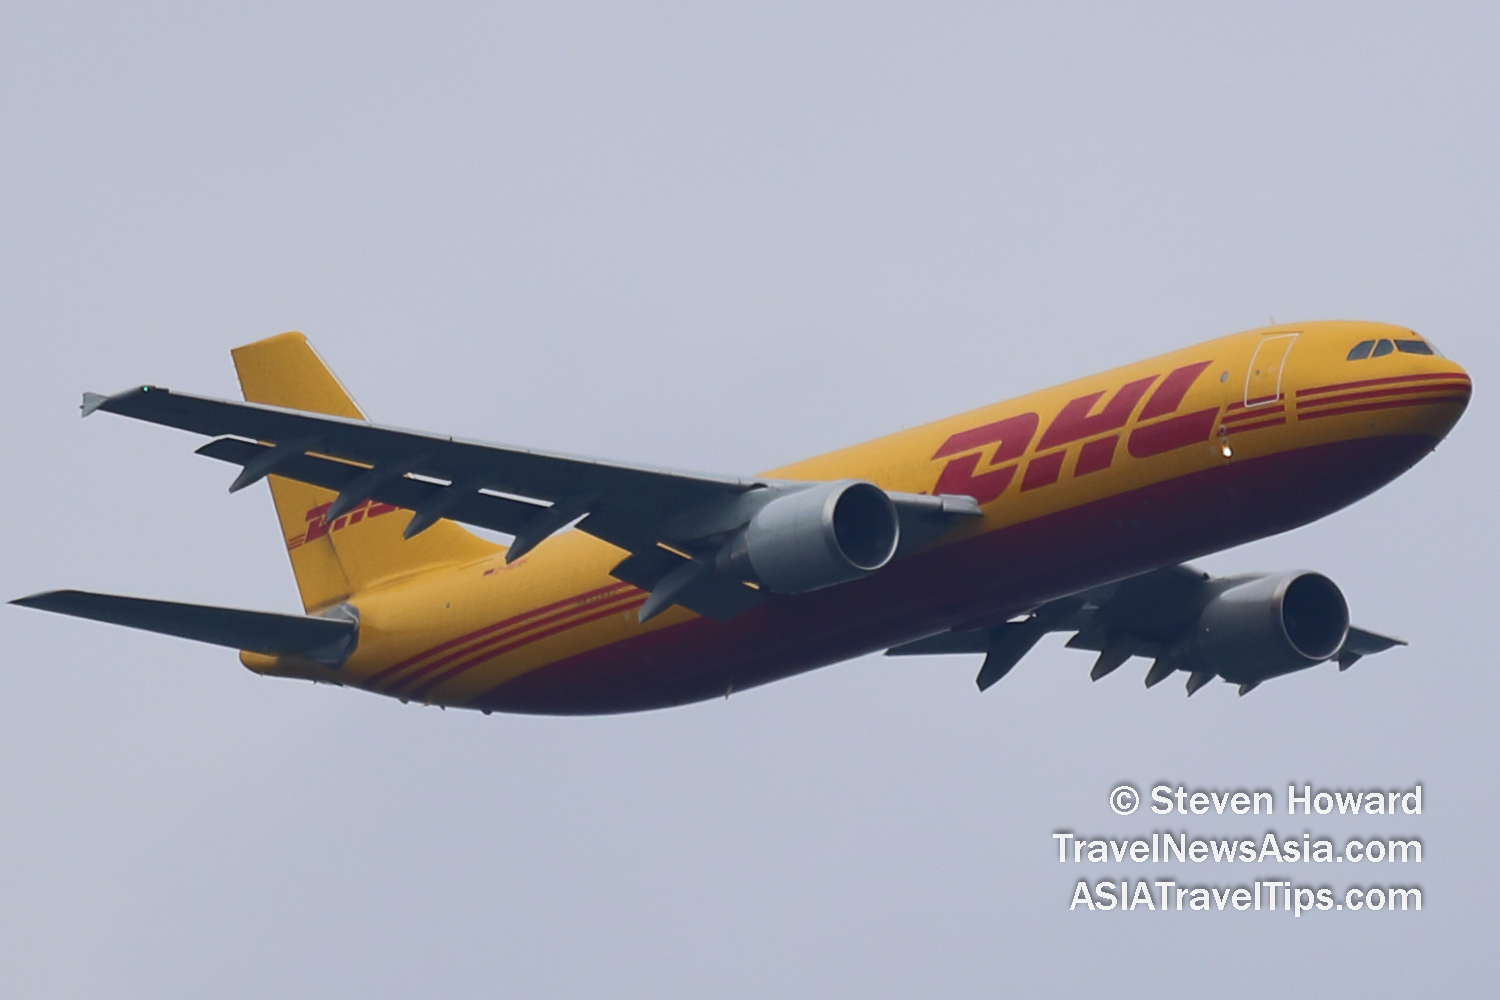 DHL Airbus A300 reg: D-AEAH. Picture by Steven Howard of TravelNewsAsia.com Click to enlarge.